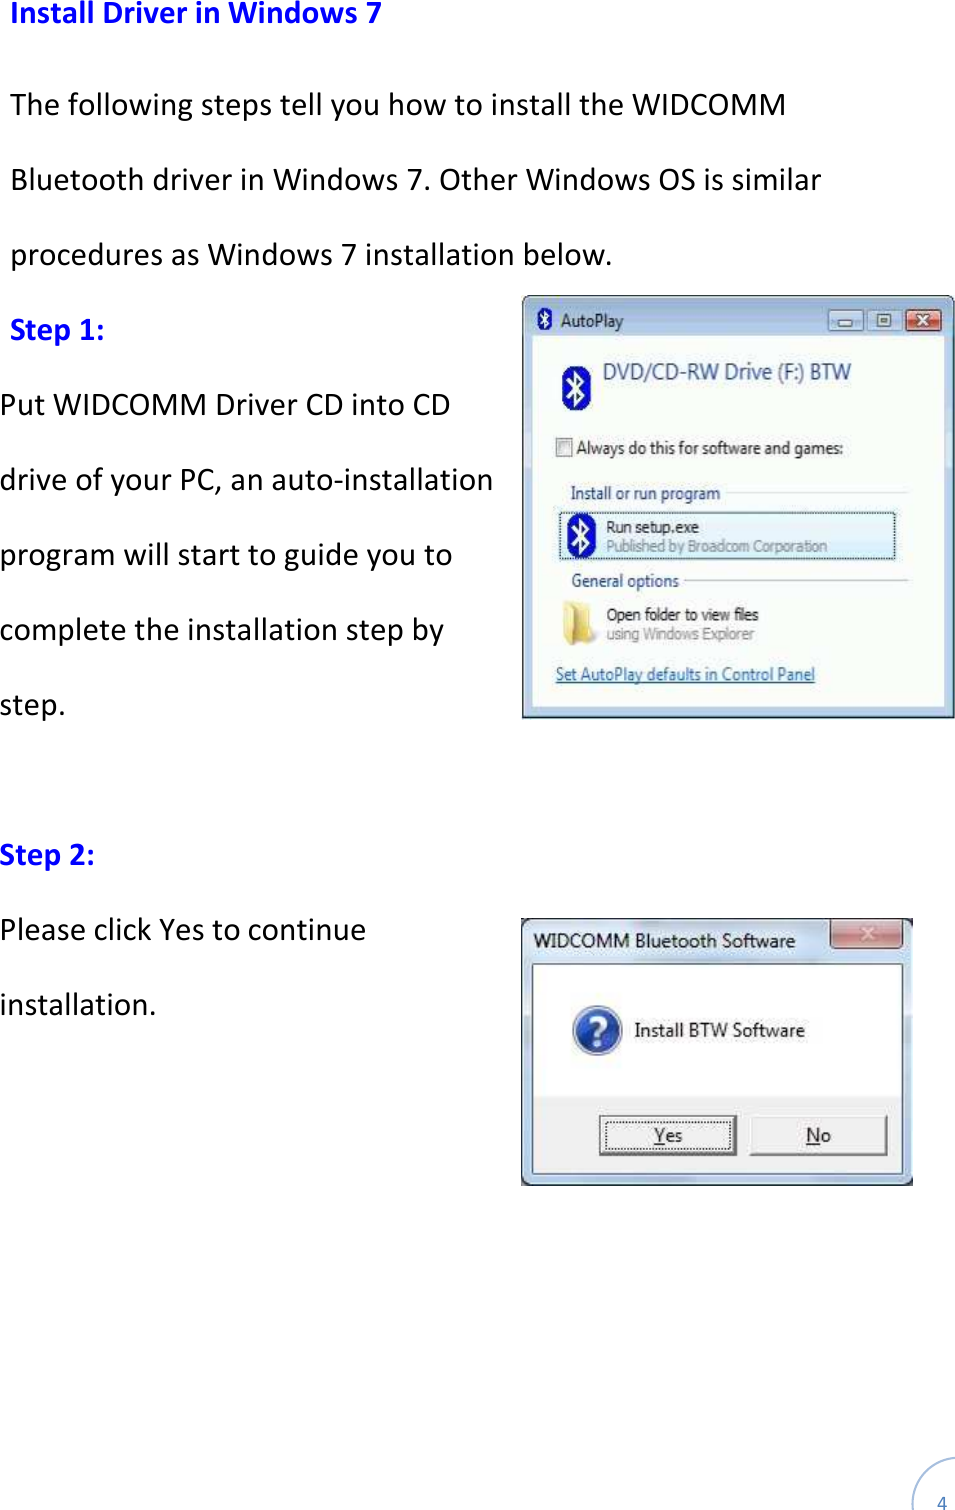  4 Install Driver in Windows 7  The following steps tell you how to install the WIDCOMM Bluetooth driver in Windows 7. Other Windows OS is similar procedures as Windows 7 installation below. Step 1: Put WIDCOMM Driver CD into CD drive of your PC, an auto-installation program will start to guide you to complete the installation step by step.  Step 2:   Please click Yes to continue installation.    